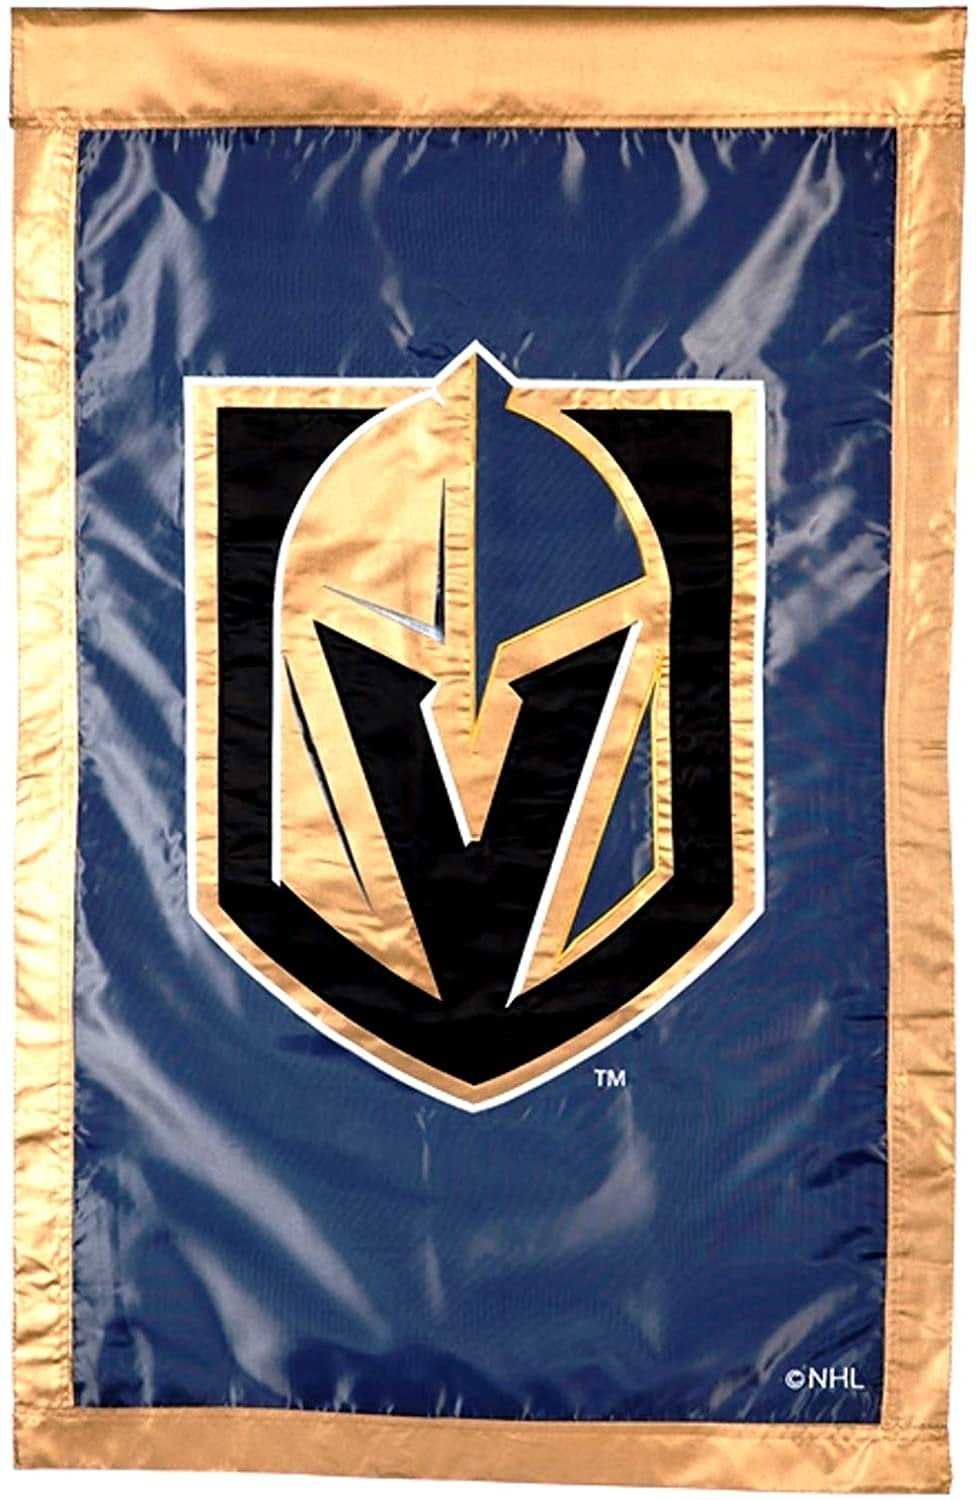 NHL GOLDEN NIGHTS BANNER FLAG (comes with beads) - Depop